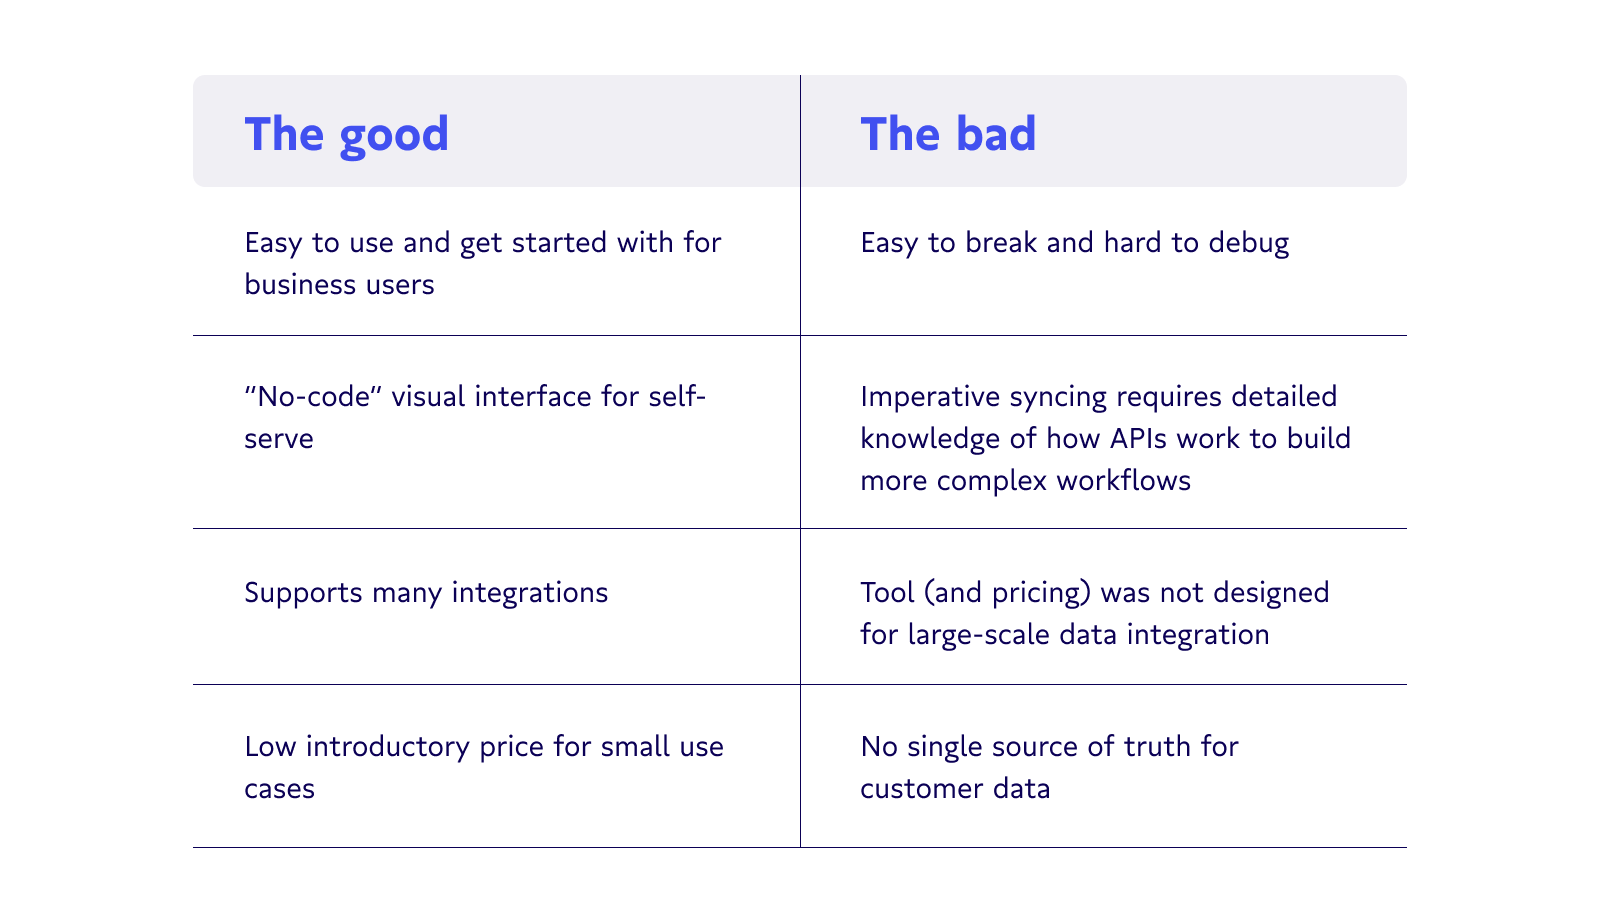 Pros and cons table for iPaaS